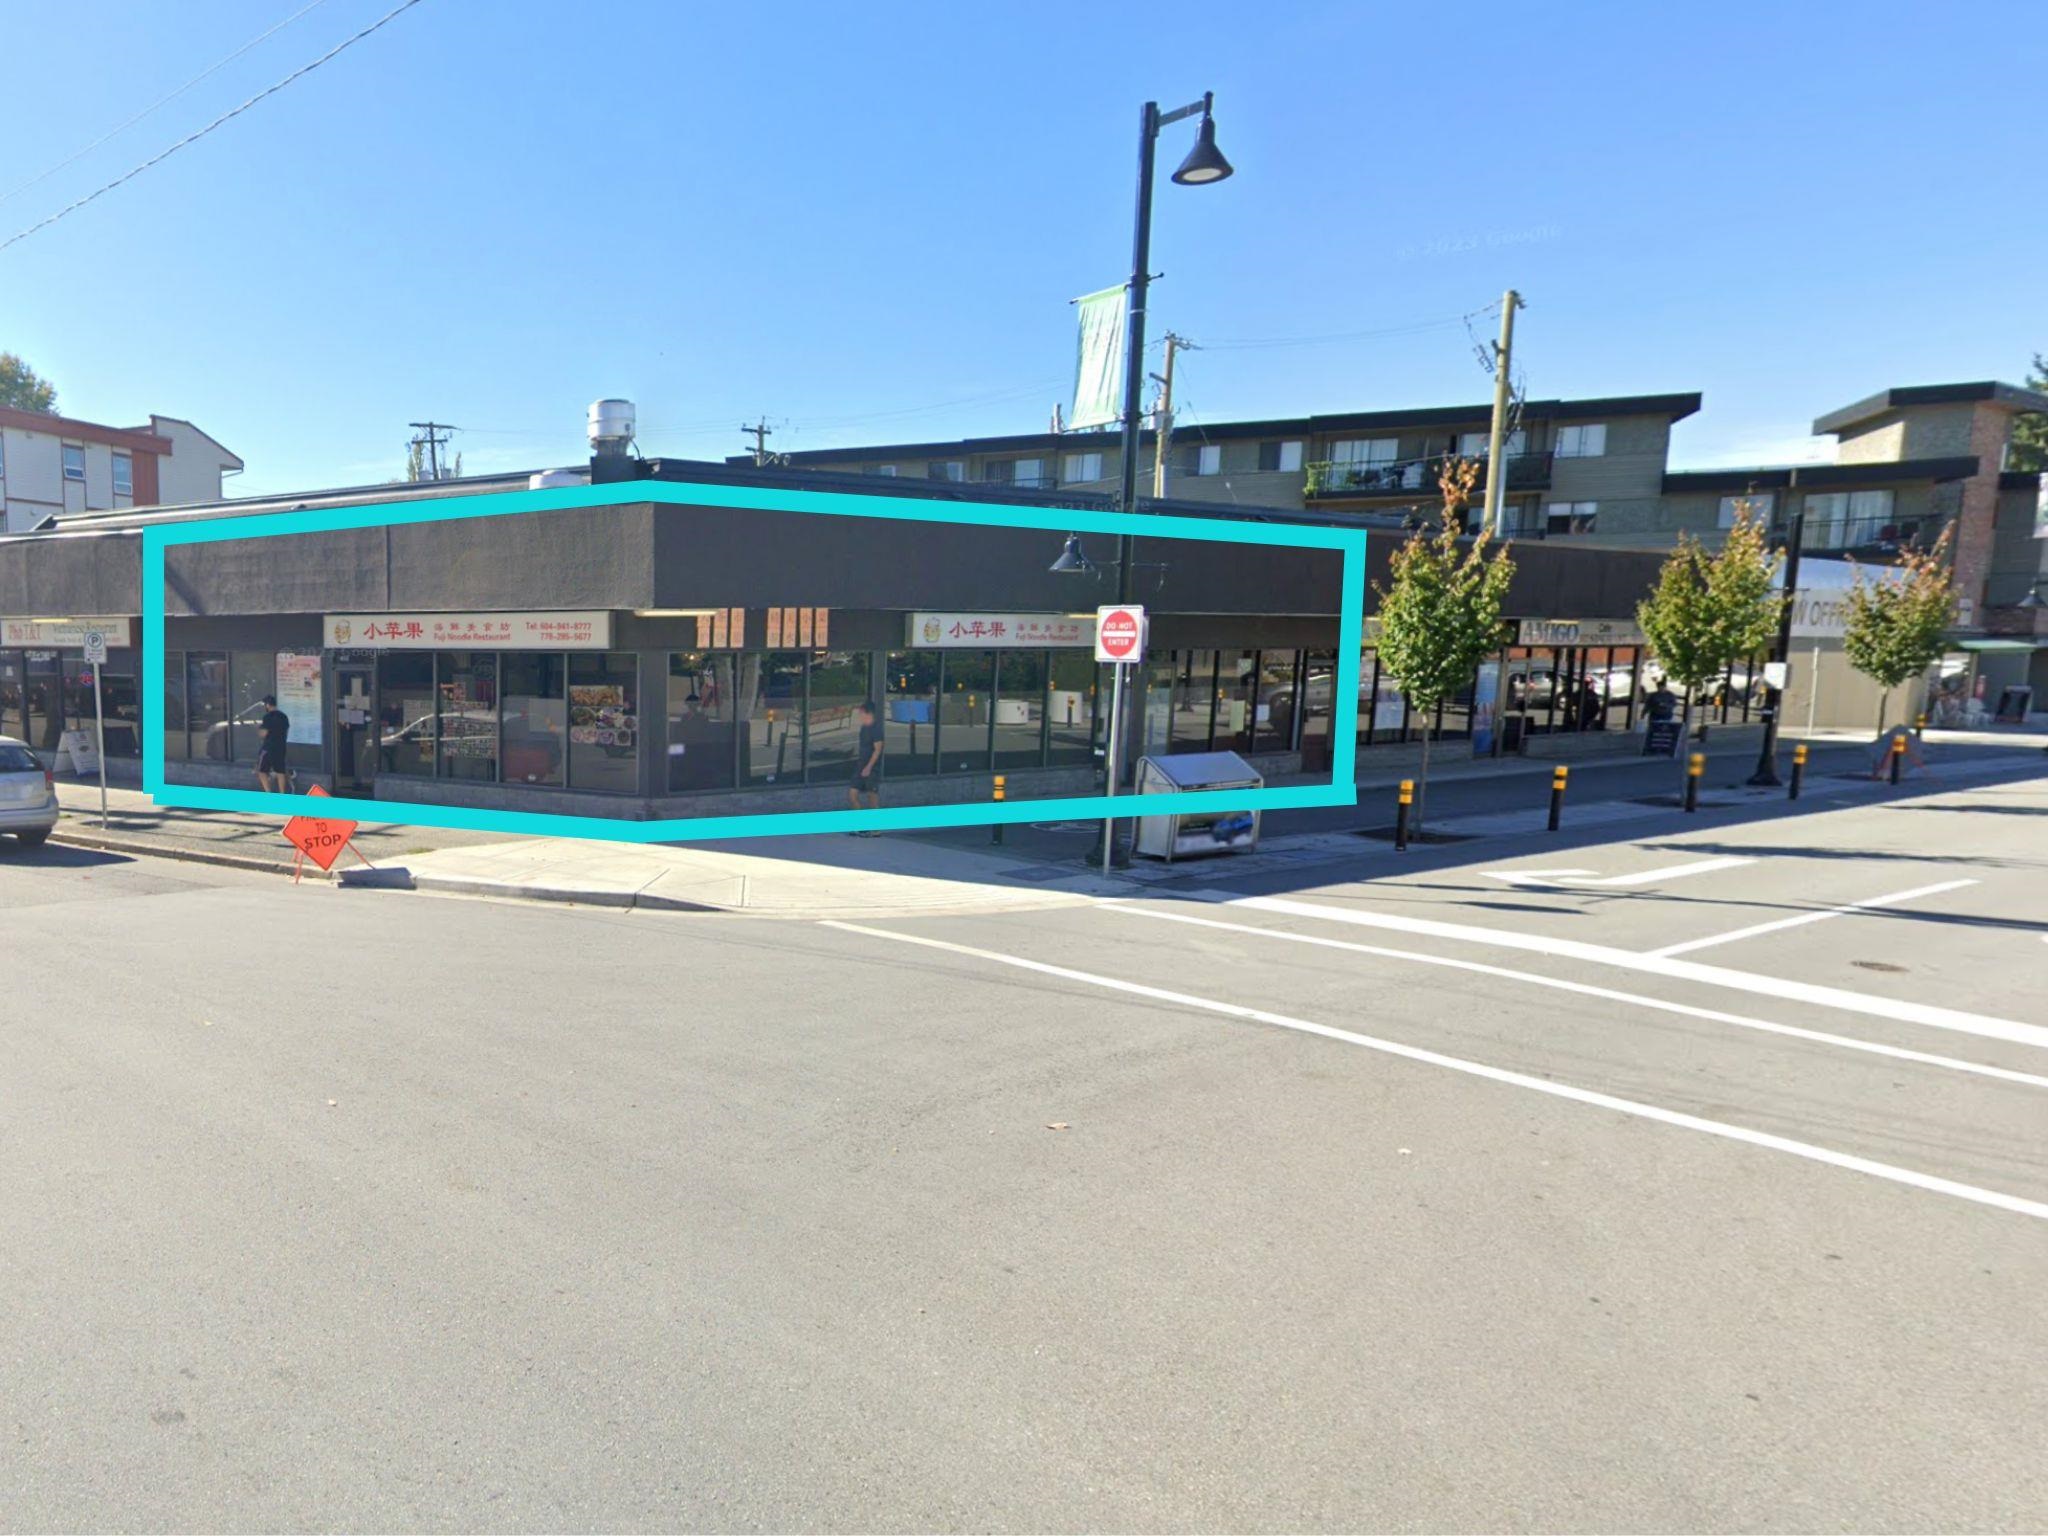 Central Pt Coquitlam Land Commercial for sale:    (Listed 6800-05-08)